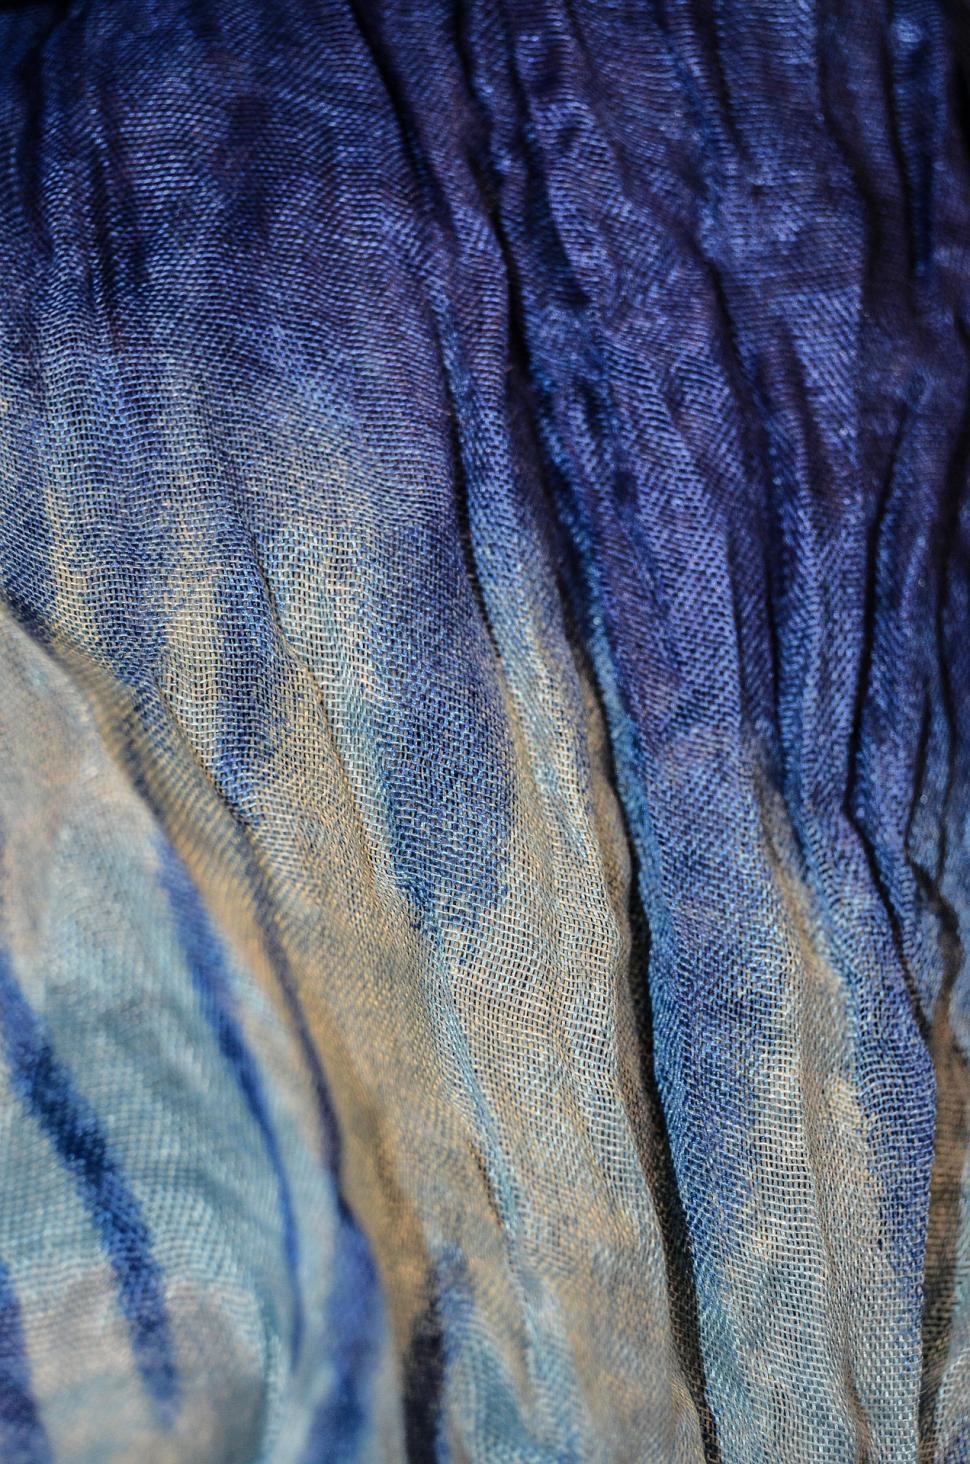 Free Image of Close Up of Blue and White Cloth 